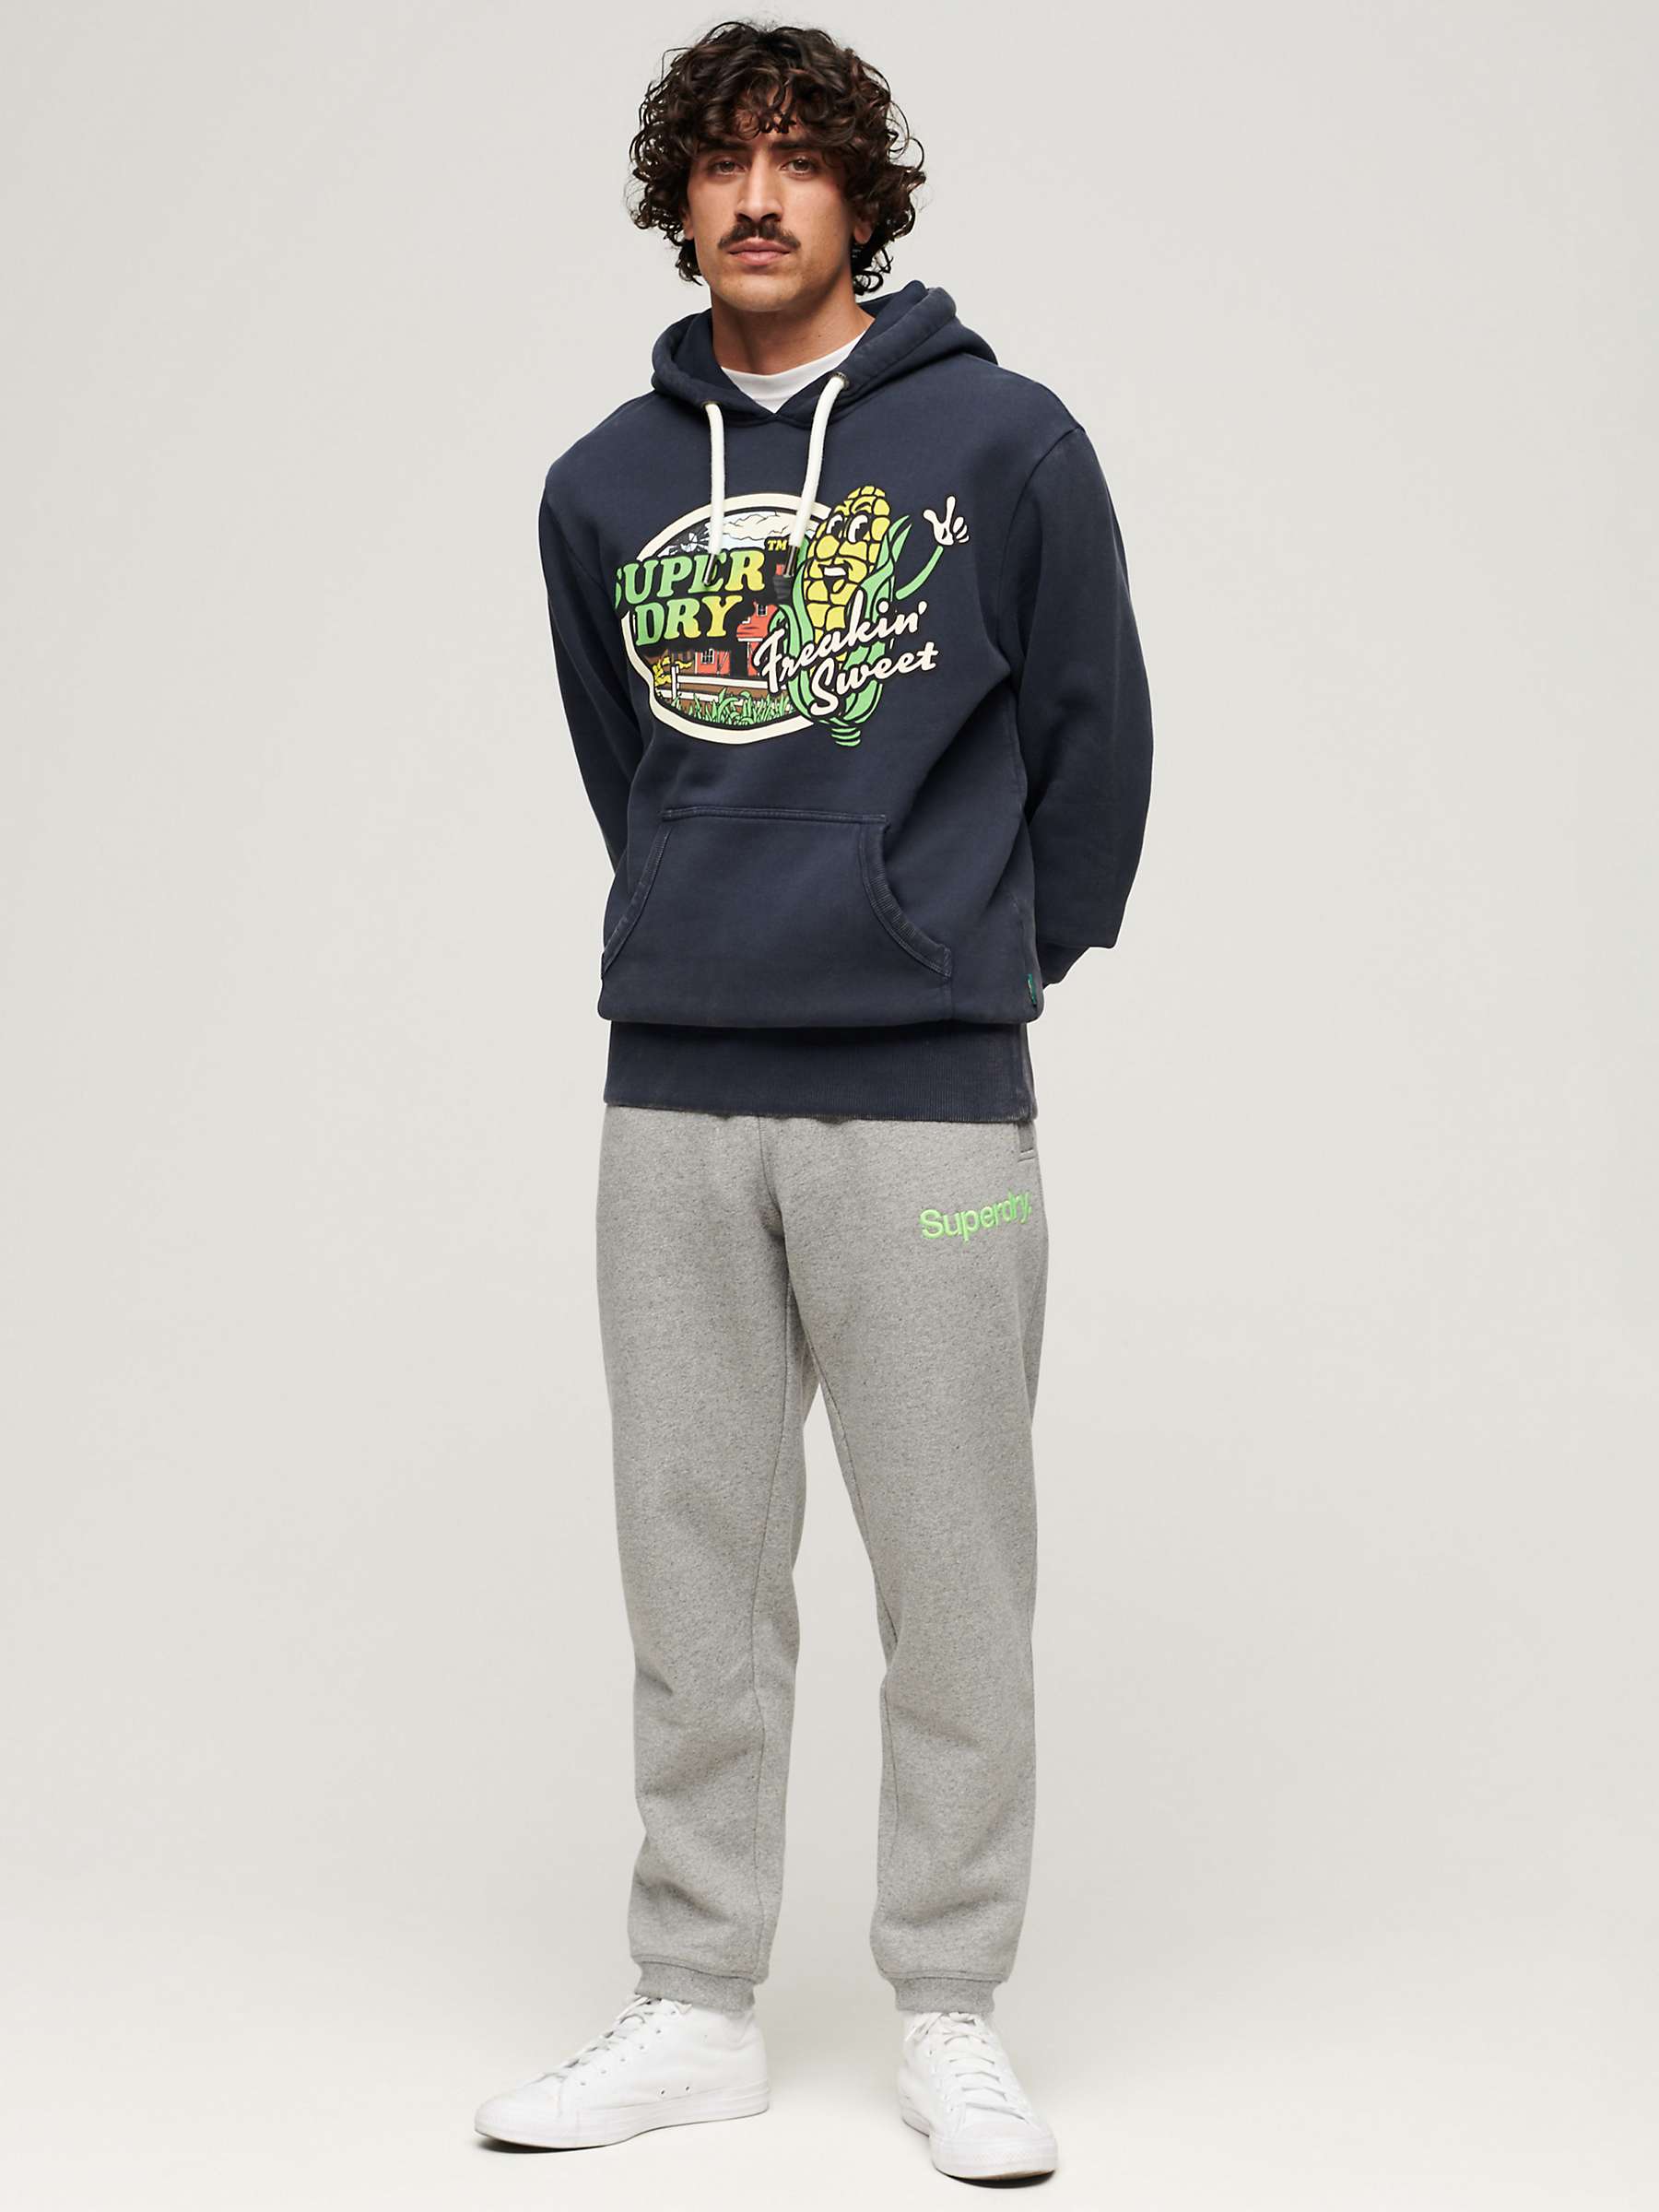 Buy Superdry Neon Travel Graphic Loose Hoodie, Eclipse Navy Online at johnlewis.com